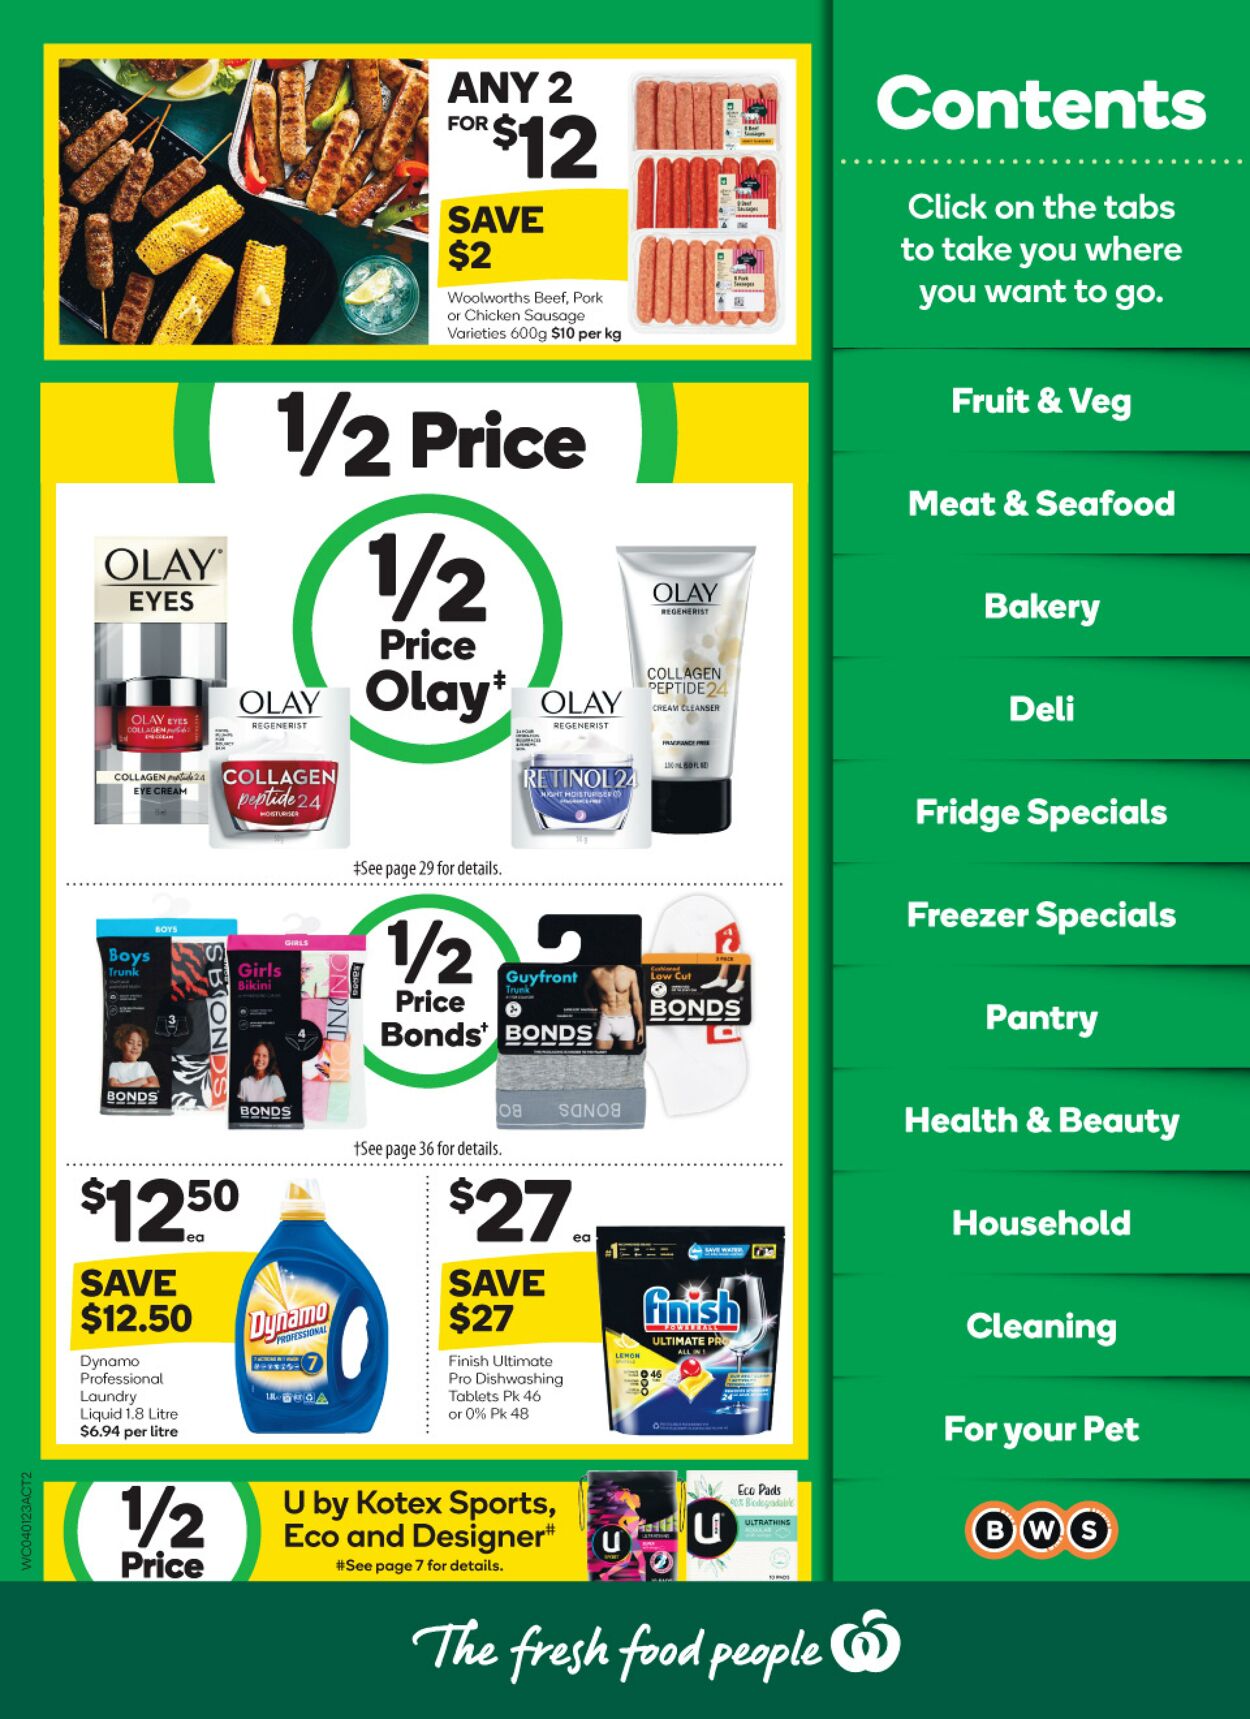 Catalogue Woolworths 04.01.2023 - 10.01.2023